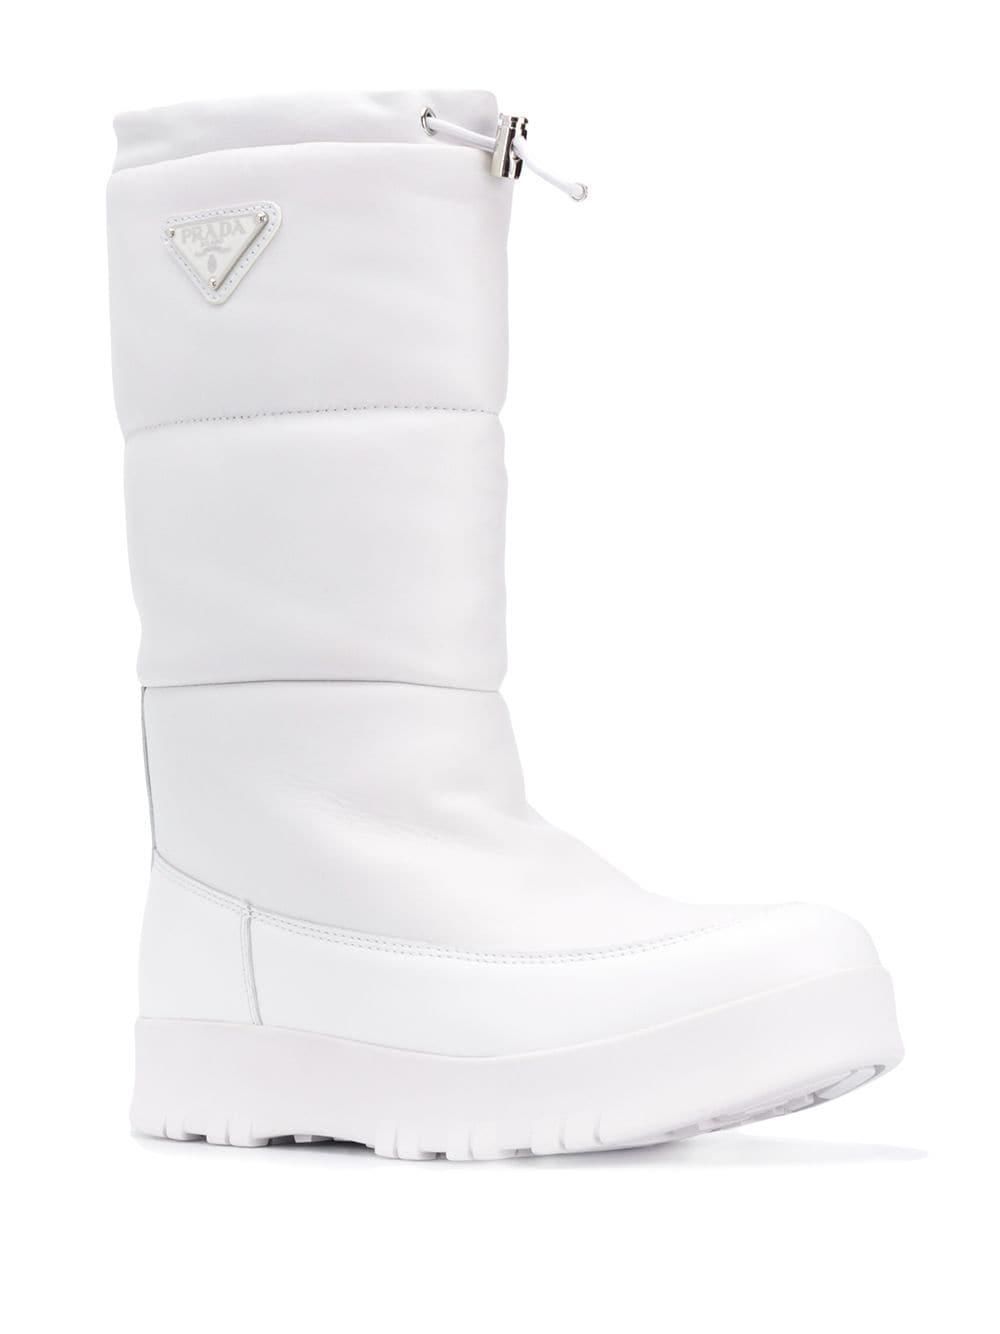 Prada Leather Padded Moon Boots in White - Lyst